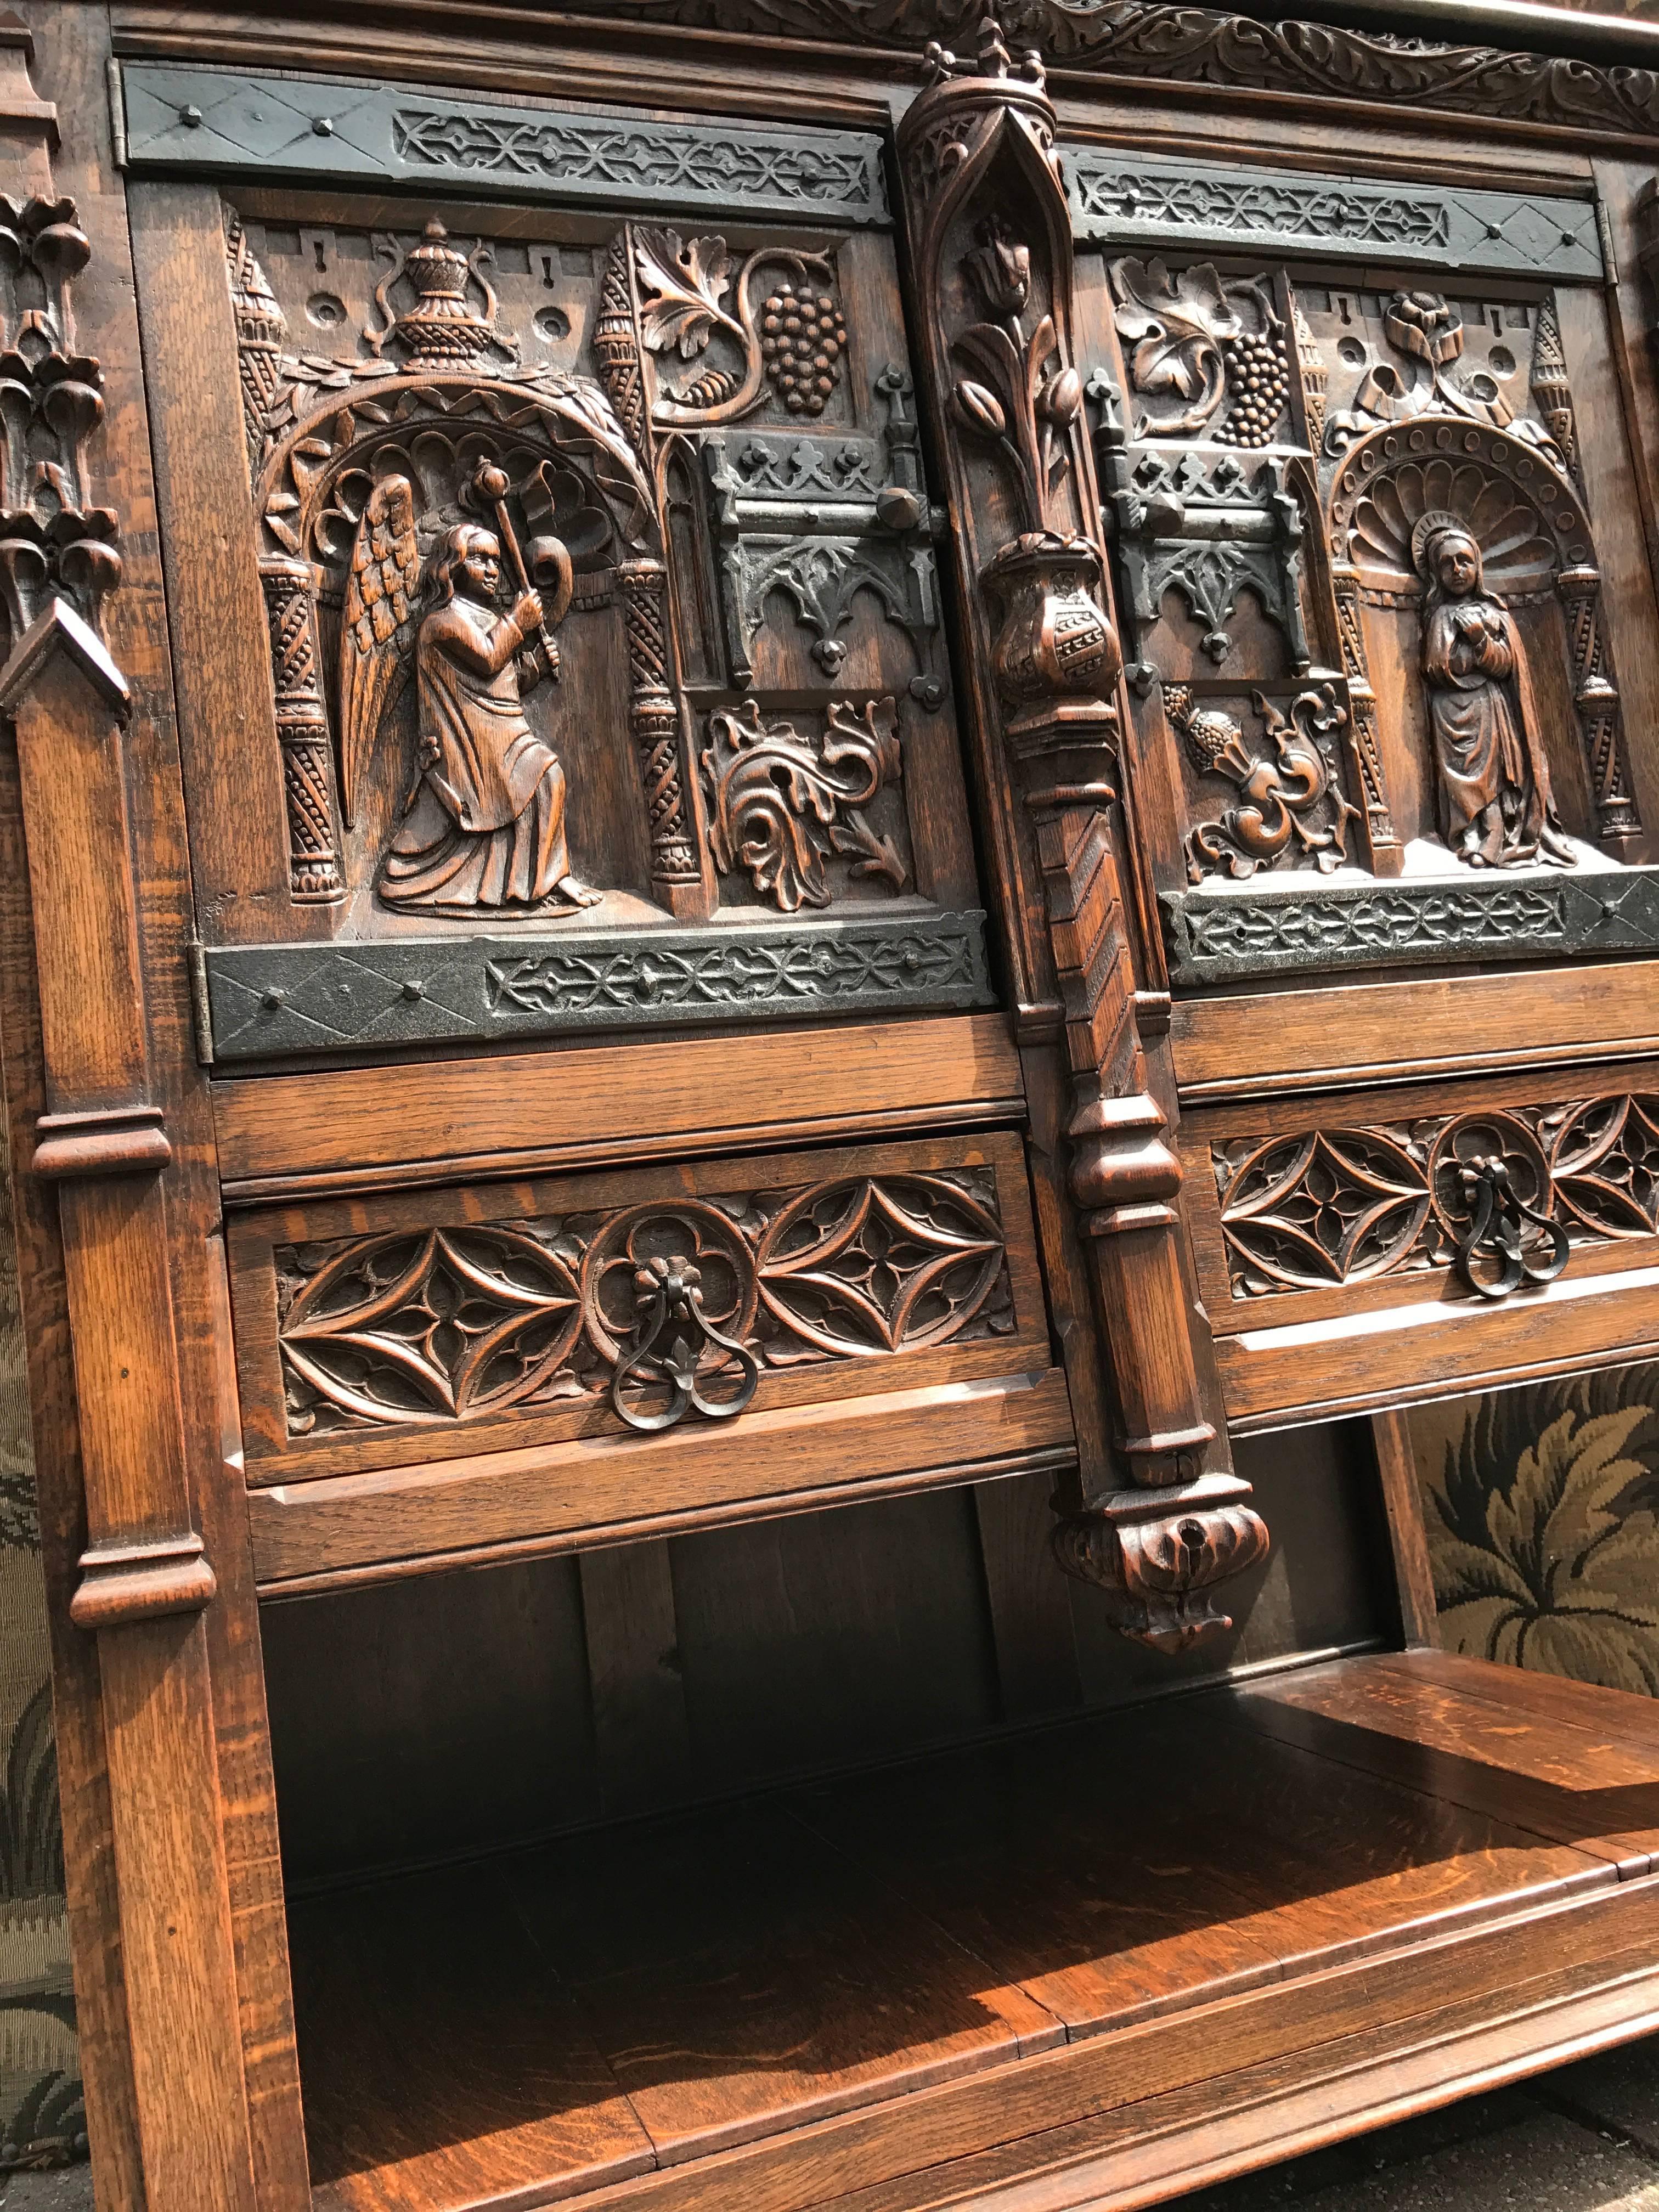 Hand-Carved Gothic Revival Carved Oak Cabinet Depicting The Annunciation To The Virgin Mary